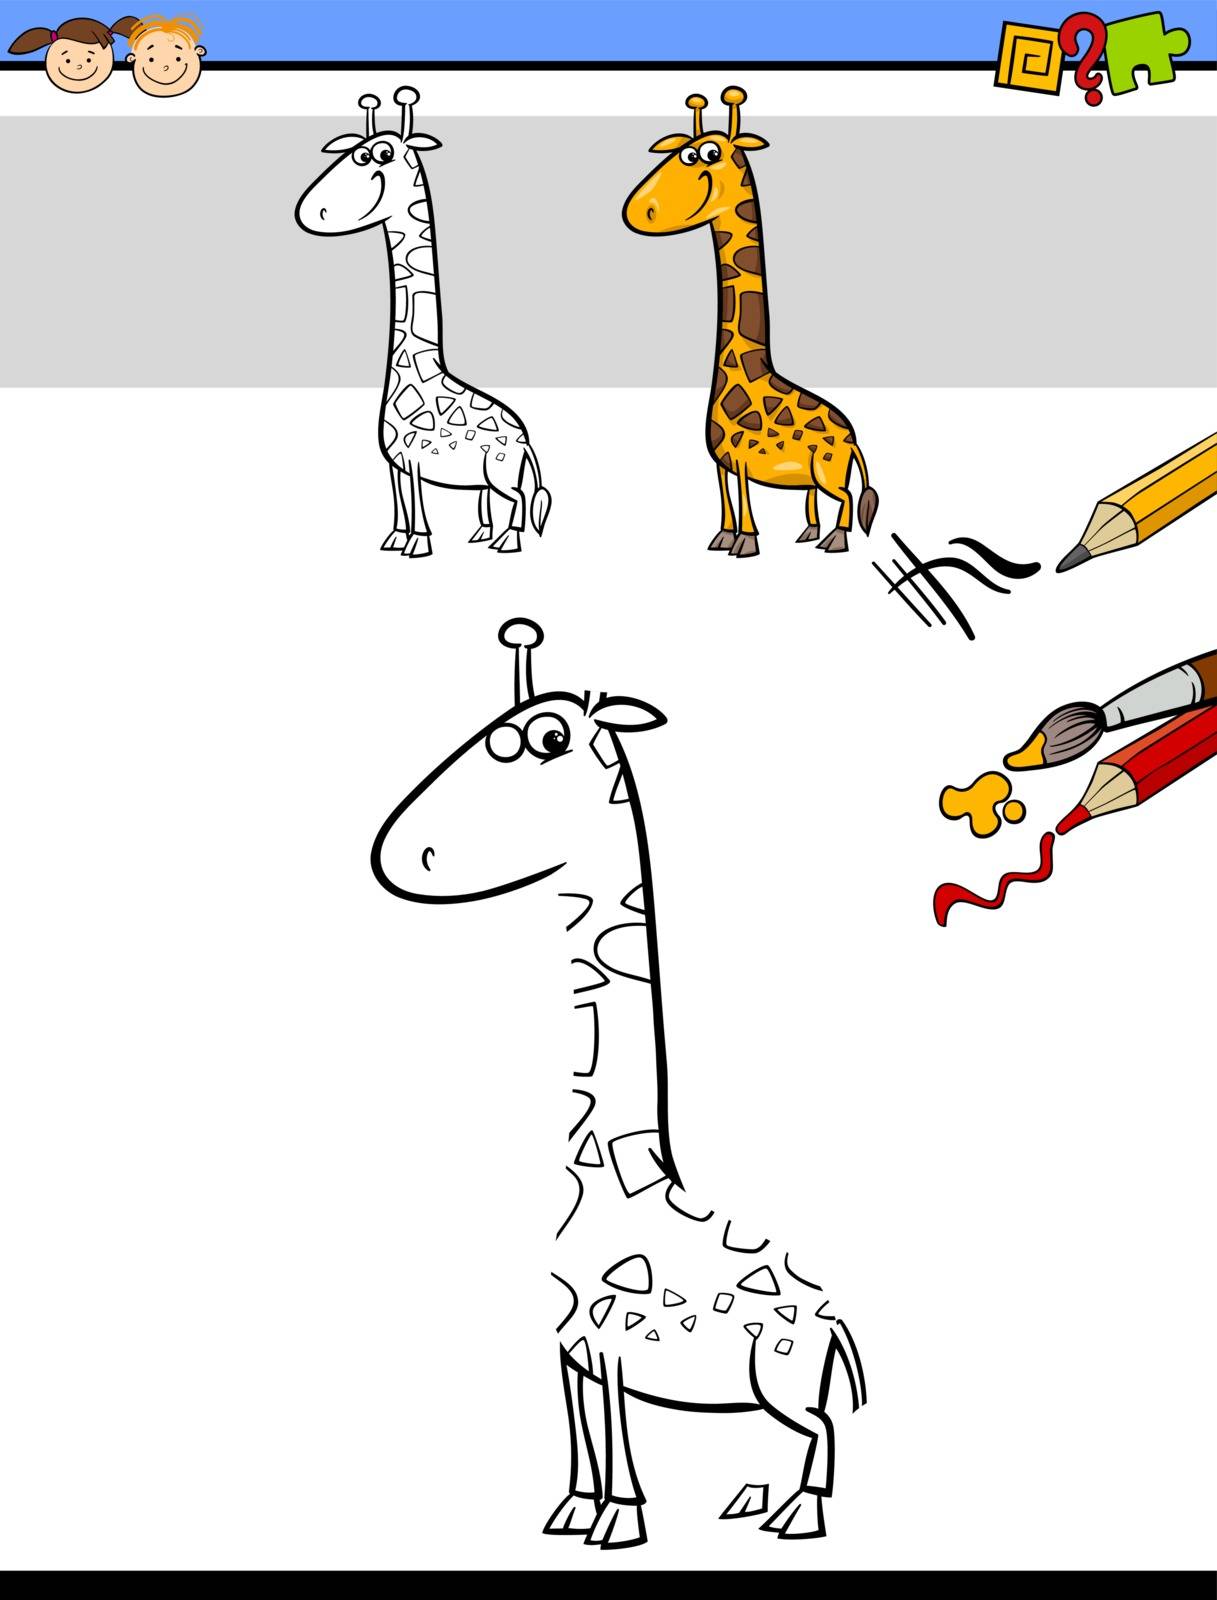 Cartoon Illustration of Drawing and Coloring Educational Task for Preschool Children with Giraffe Animal Character